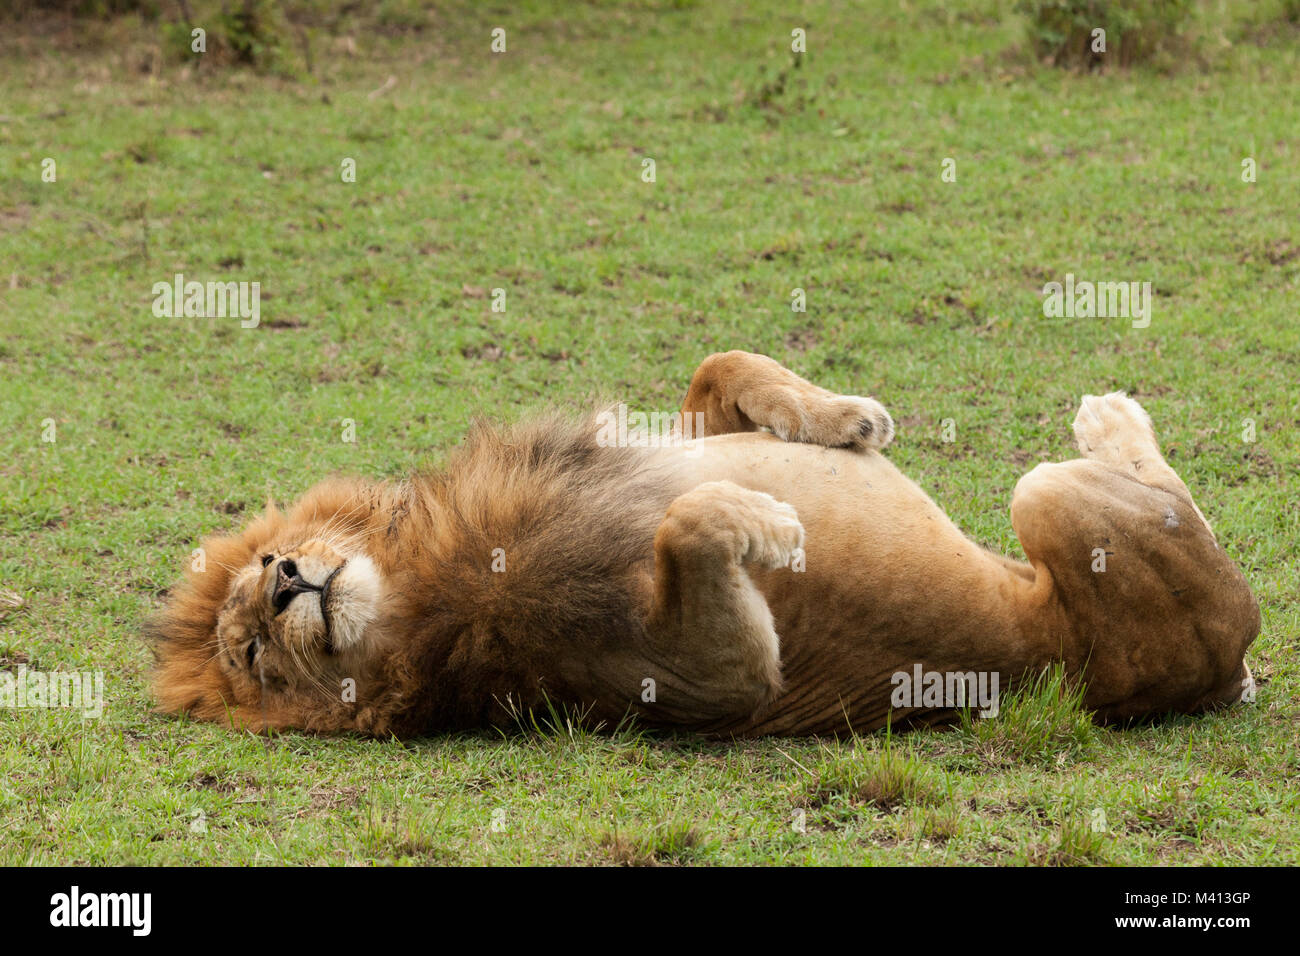 A Male Lion Lying On His Back On The Grasslands Of The Maasai Mara